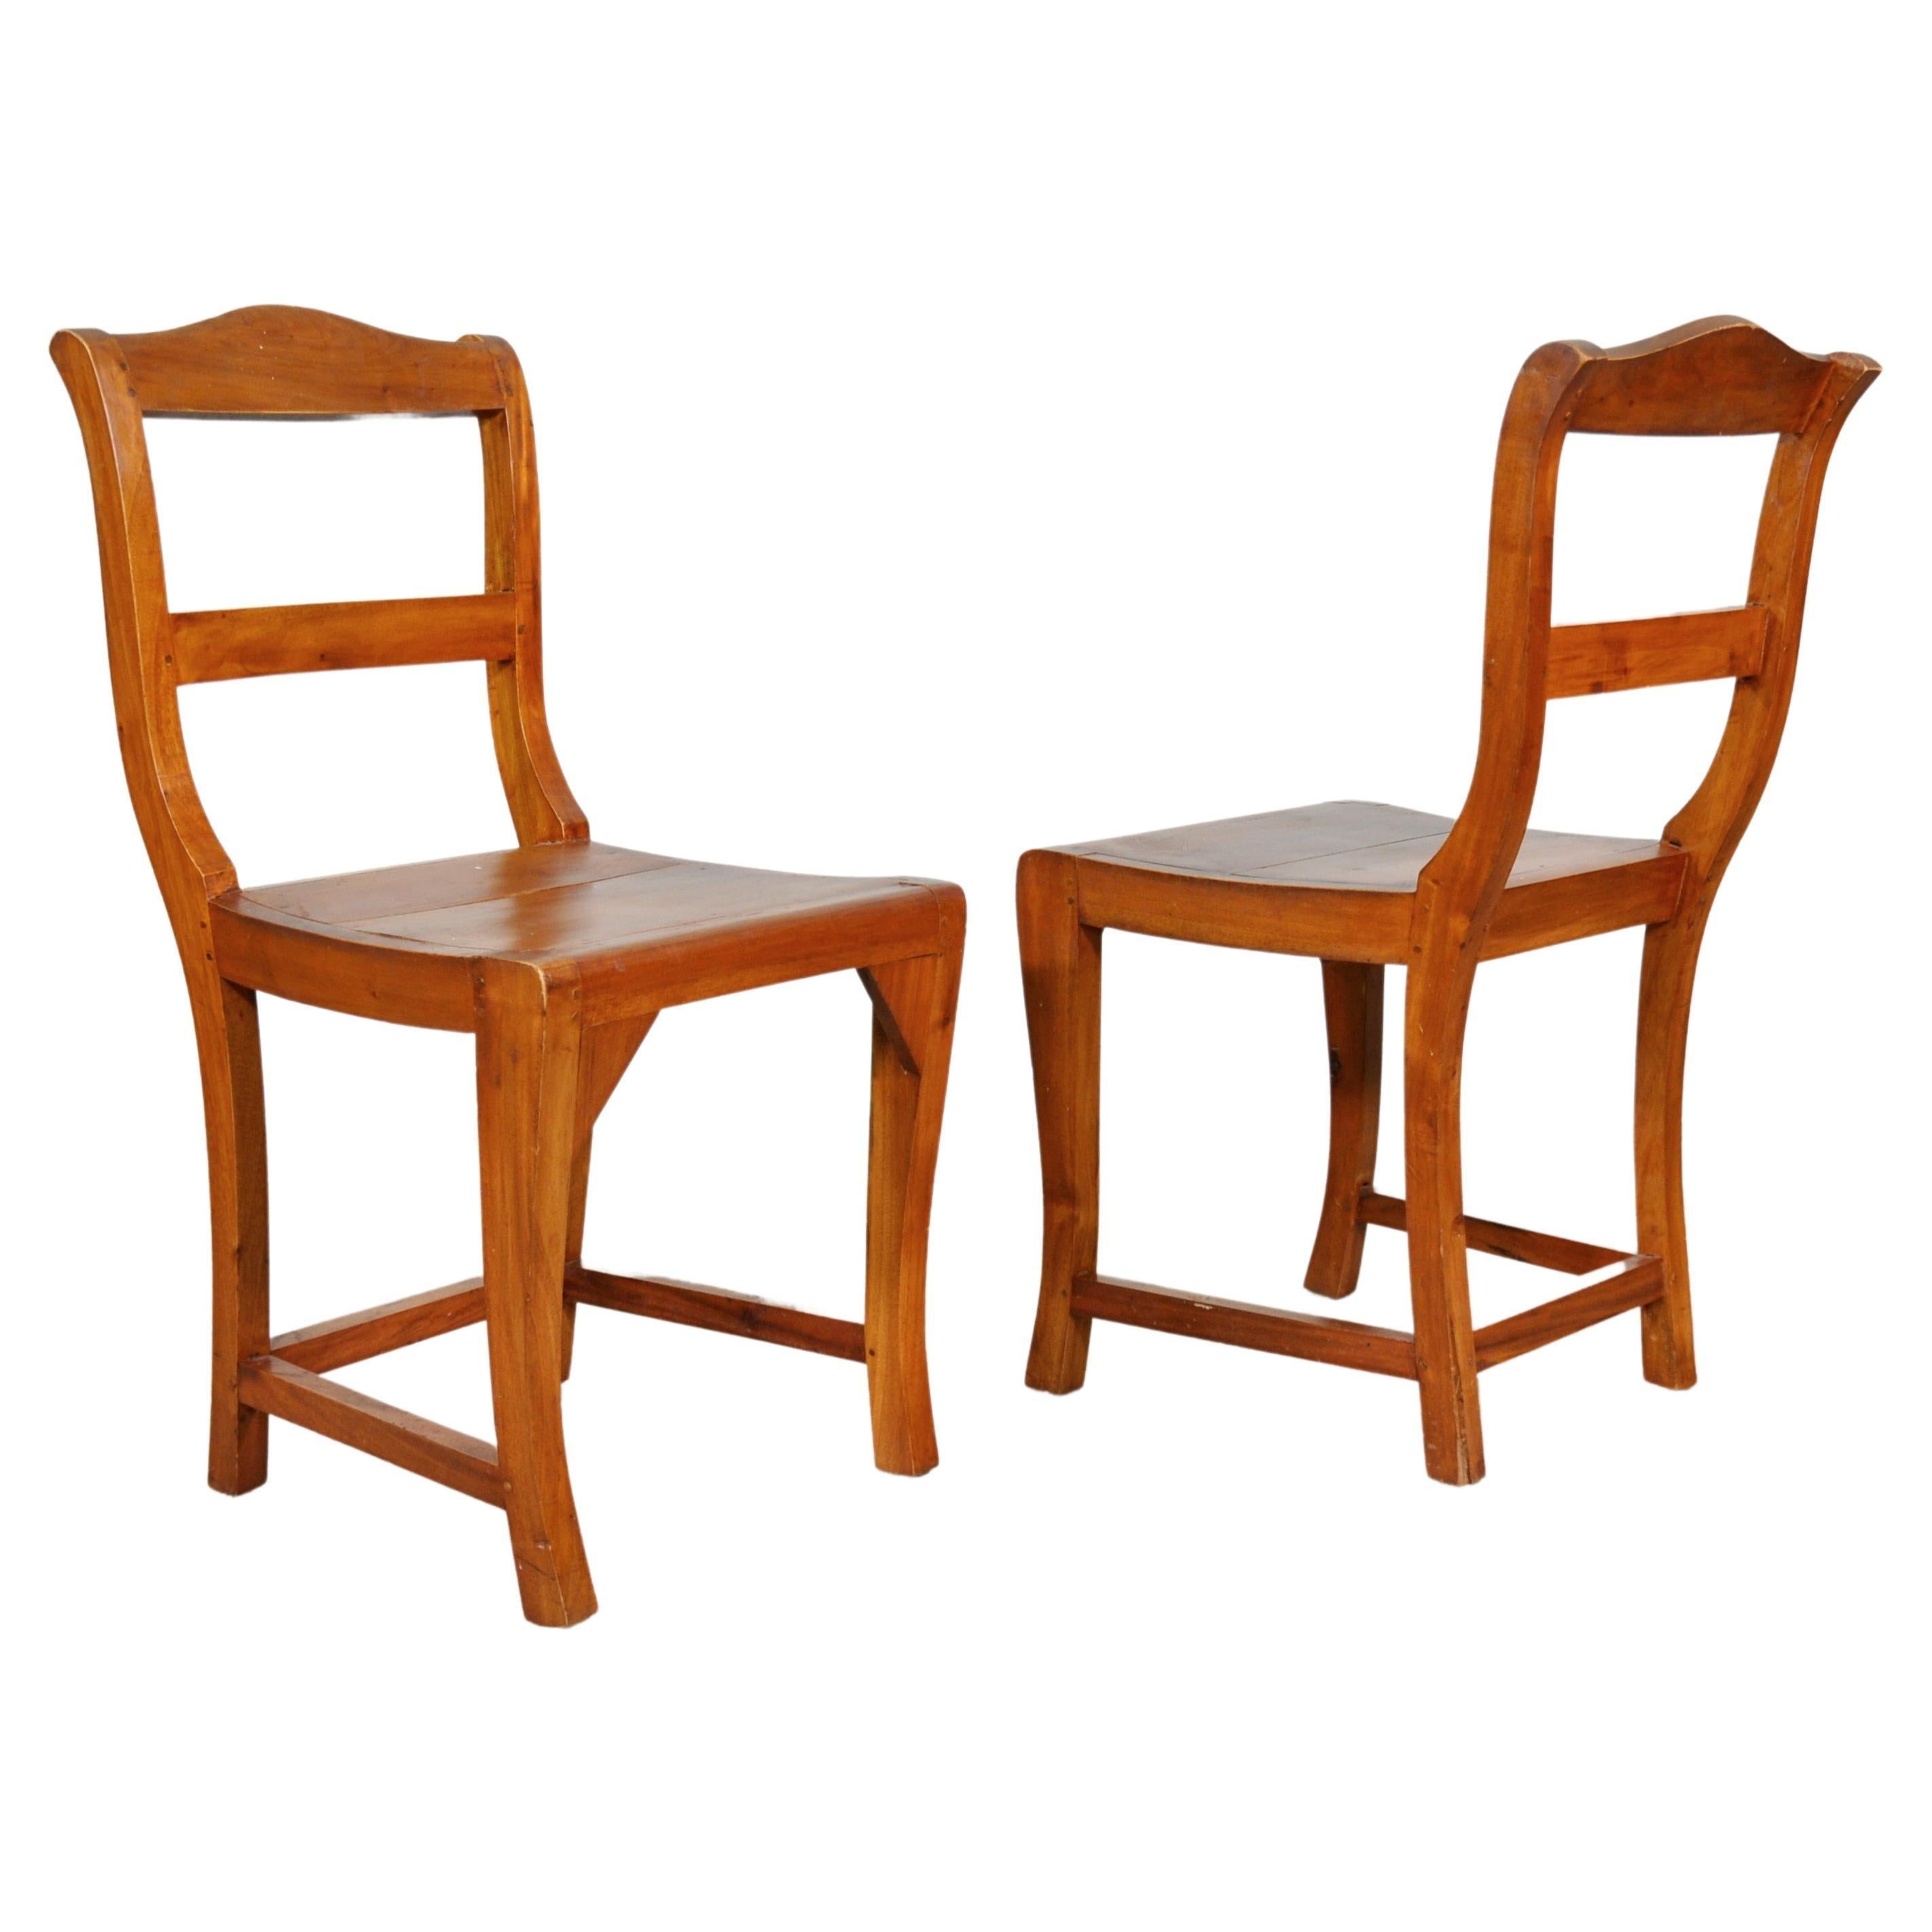 Unusual pair of antique hand-crafted shaped ladder back chairs made from fruitwood. Circa 1880. Ideal for use in a hall / mud room. Rustic French country look that works equally well in a beach house, a farmhouse or a mountain ski resort chalet.